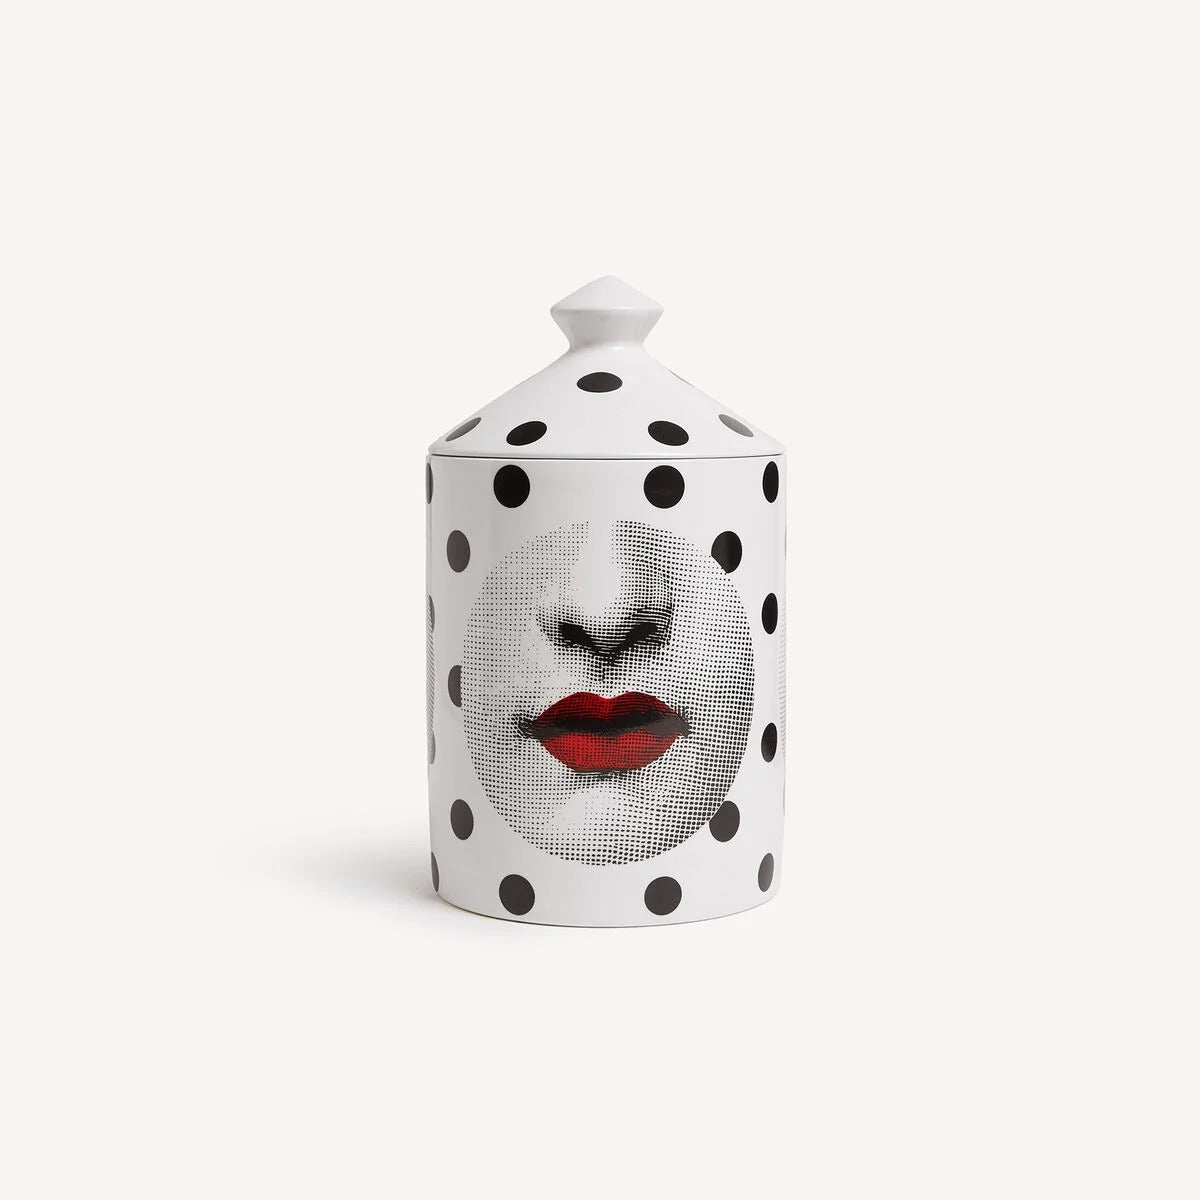 Fornasetti Comme des Forna Candle 1.9KG at Violet x Grace Miami